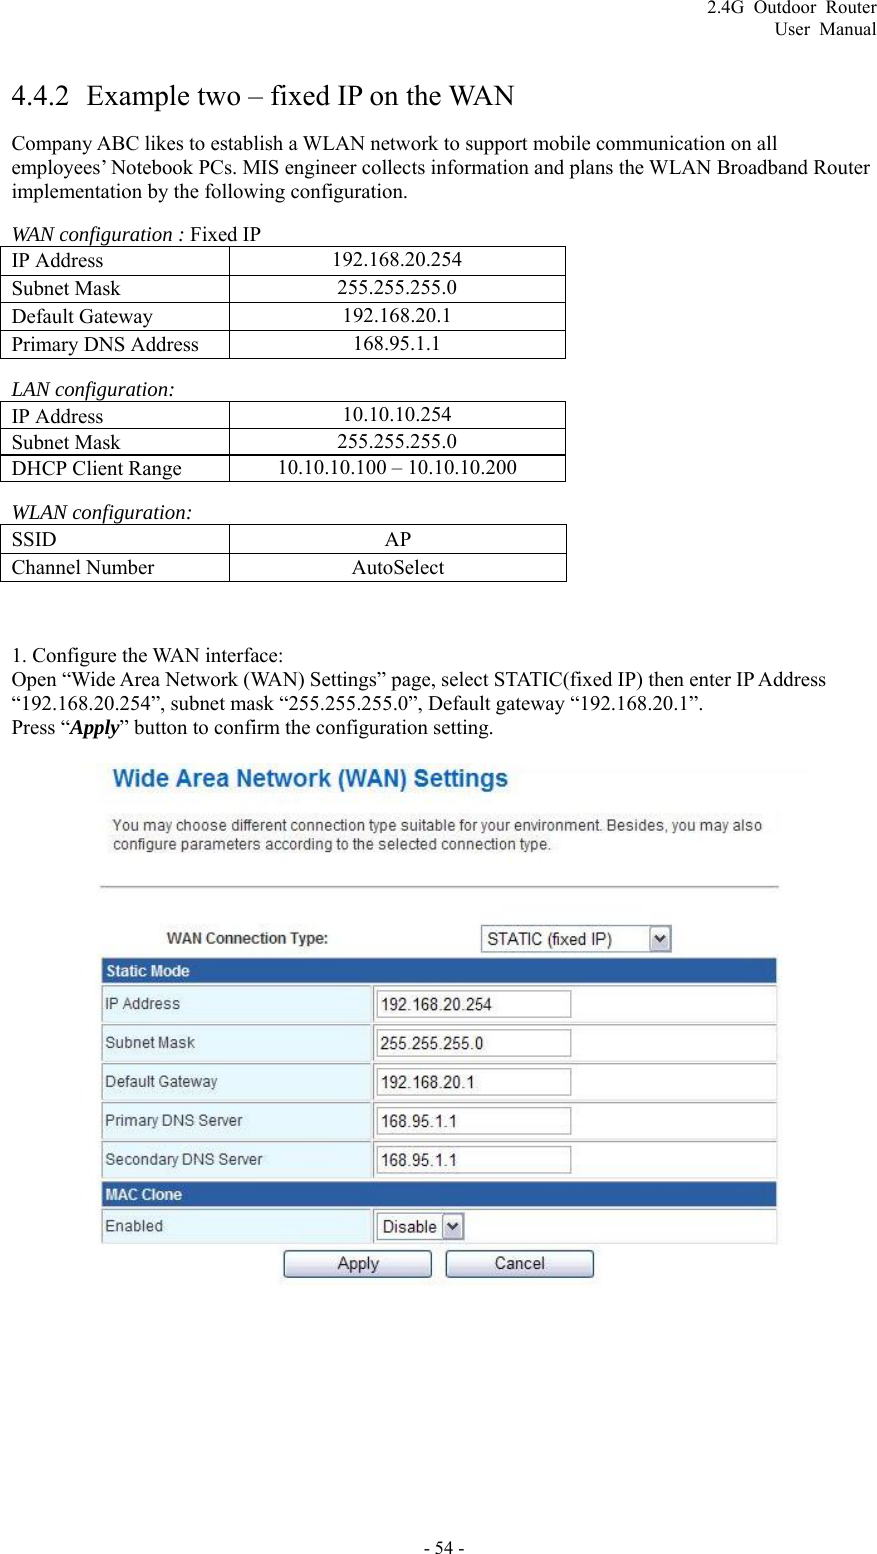 2.4G Outdoor Router User Manual  4.4.2 Example two – fixed IP on the WAN Company ABC likes to establish a WLAN network to support mobile communication on all employees’ Notebook PCs. MIS engineer collects information and plans the WLAN Broadband Router implementation by the following configuration. WAN configuration : Fixed IP IP Address    192.168.20.254 Subnet Mask    255.255.255.0 Default Gateway    192.168.20.1 Primary DNS Address    168.95.1.1 LAN configuration: IP Address    10.10.10.254 Subnet Mask    255.255.255.0 DHCP Client Range    10.10.10.100 – 10.10.10.200 WLAN configuration: SSID   AP Channel Number    AutoSelect  1. Configure the WAN interface:   Open “Wide Area Network (WAN) Settings” page, select STATIC(fixed IP) then enter IP Address “192.168.20.254”, subnet mask “255.255.255.0”, Default gateway “192.168.20.1”. Press “Apply” button to confirm the configuration setting.   - 54 - 